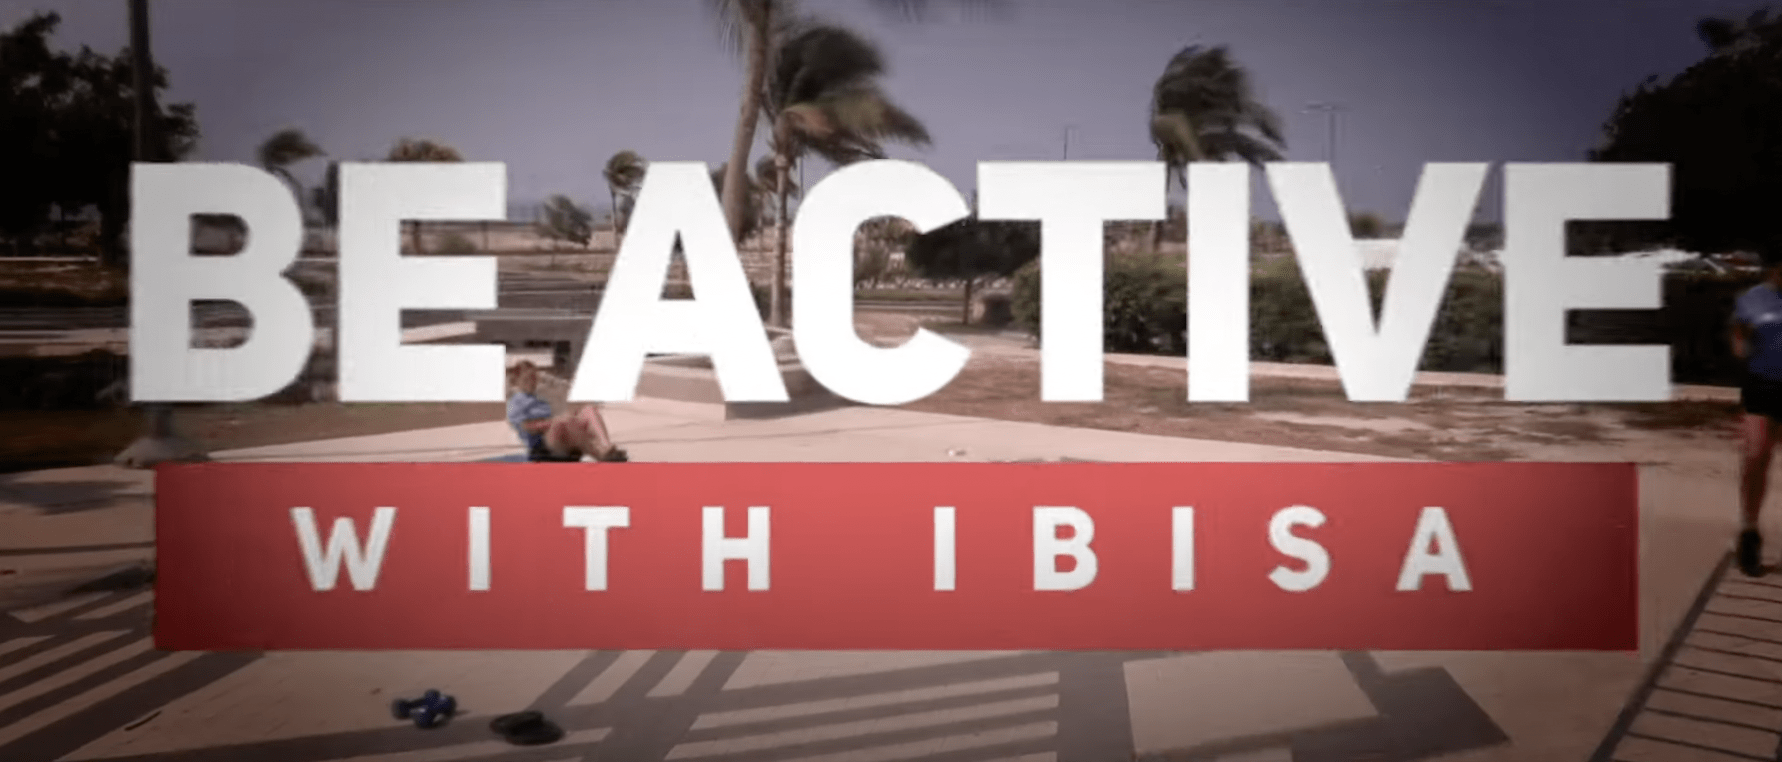 BE ACTIVE WITH IBISA (EP. 5): BOM-MEN cooling down WORKOUT